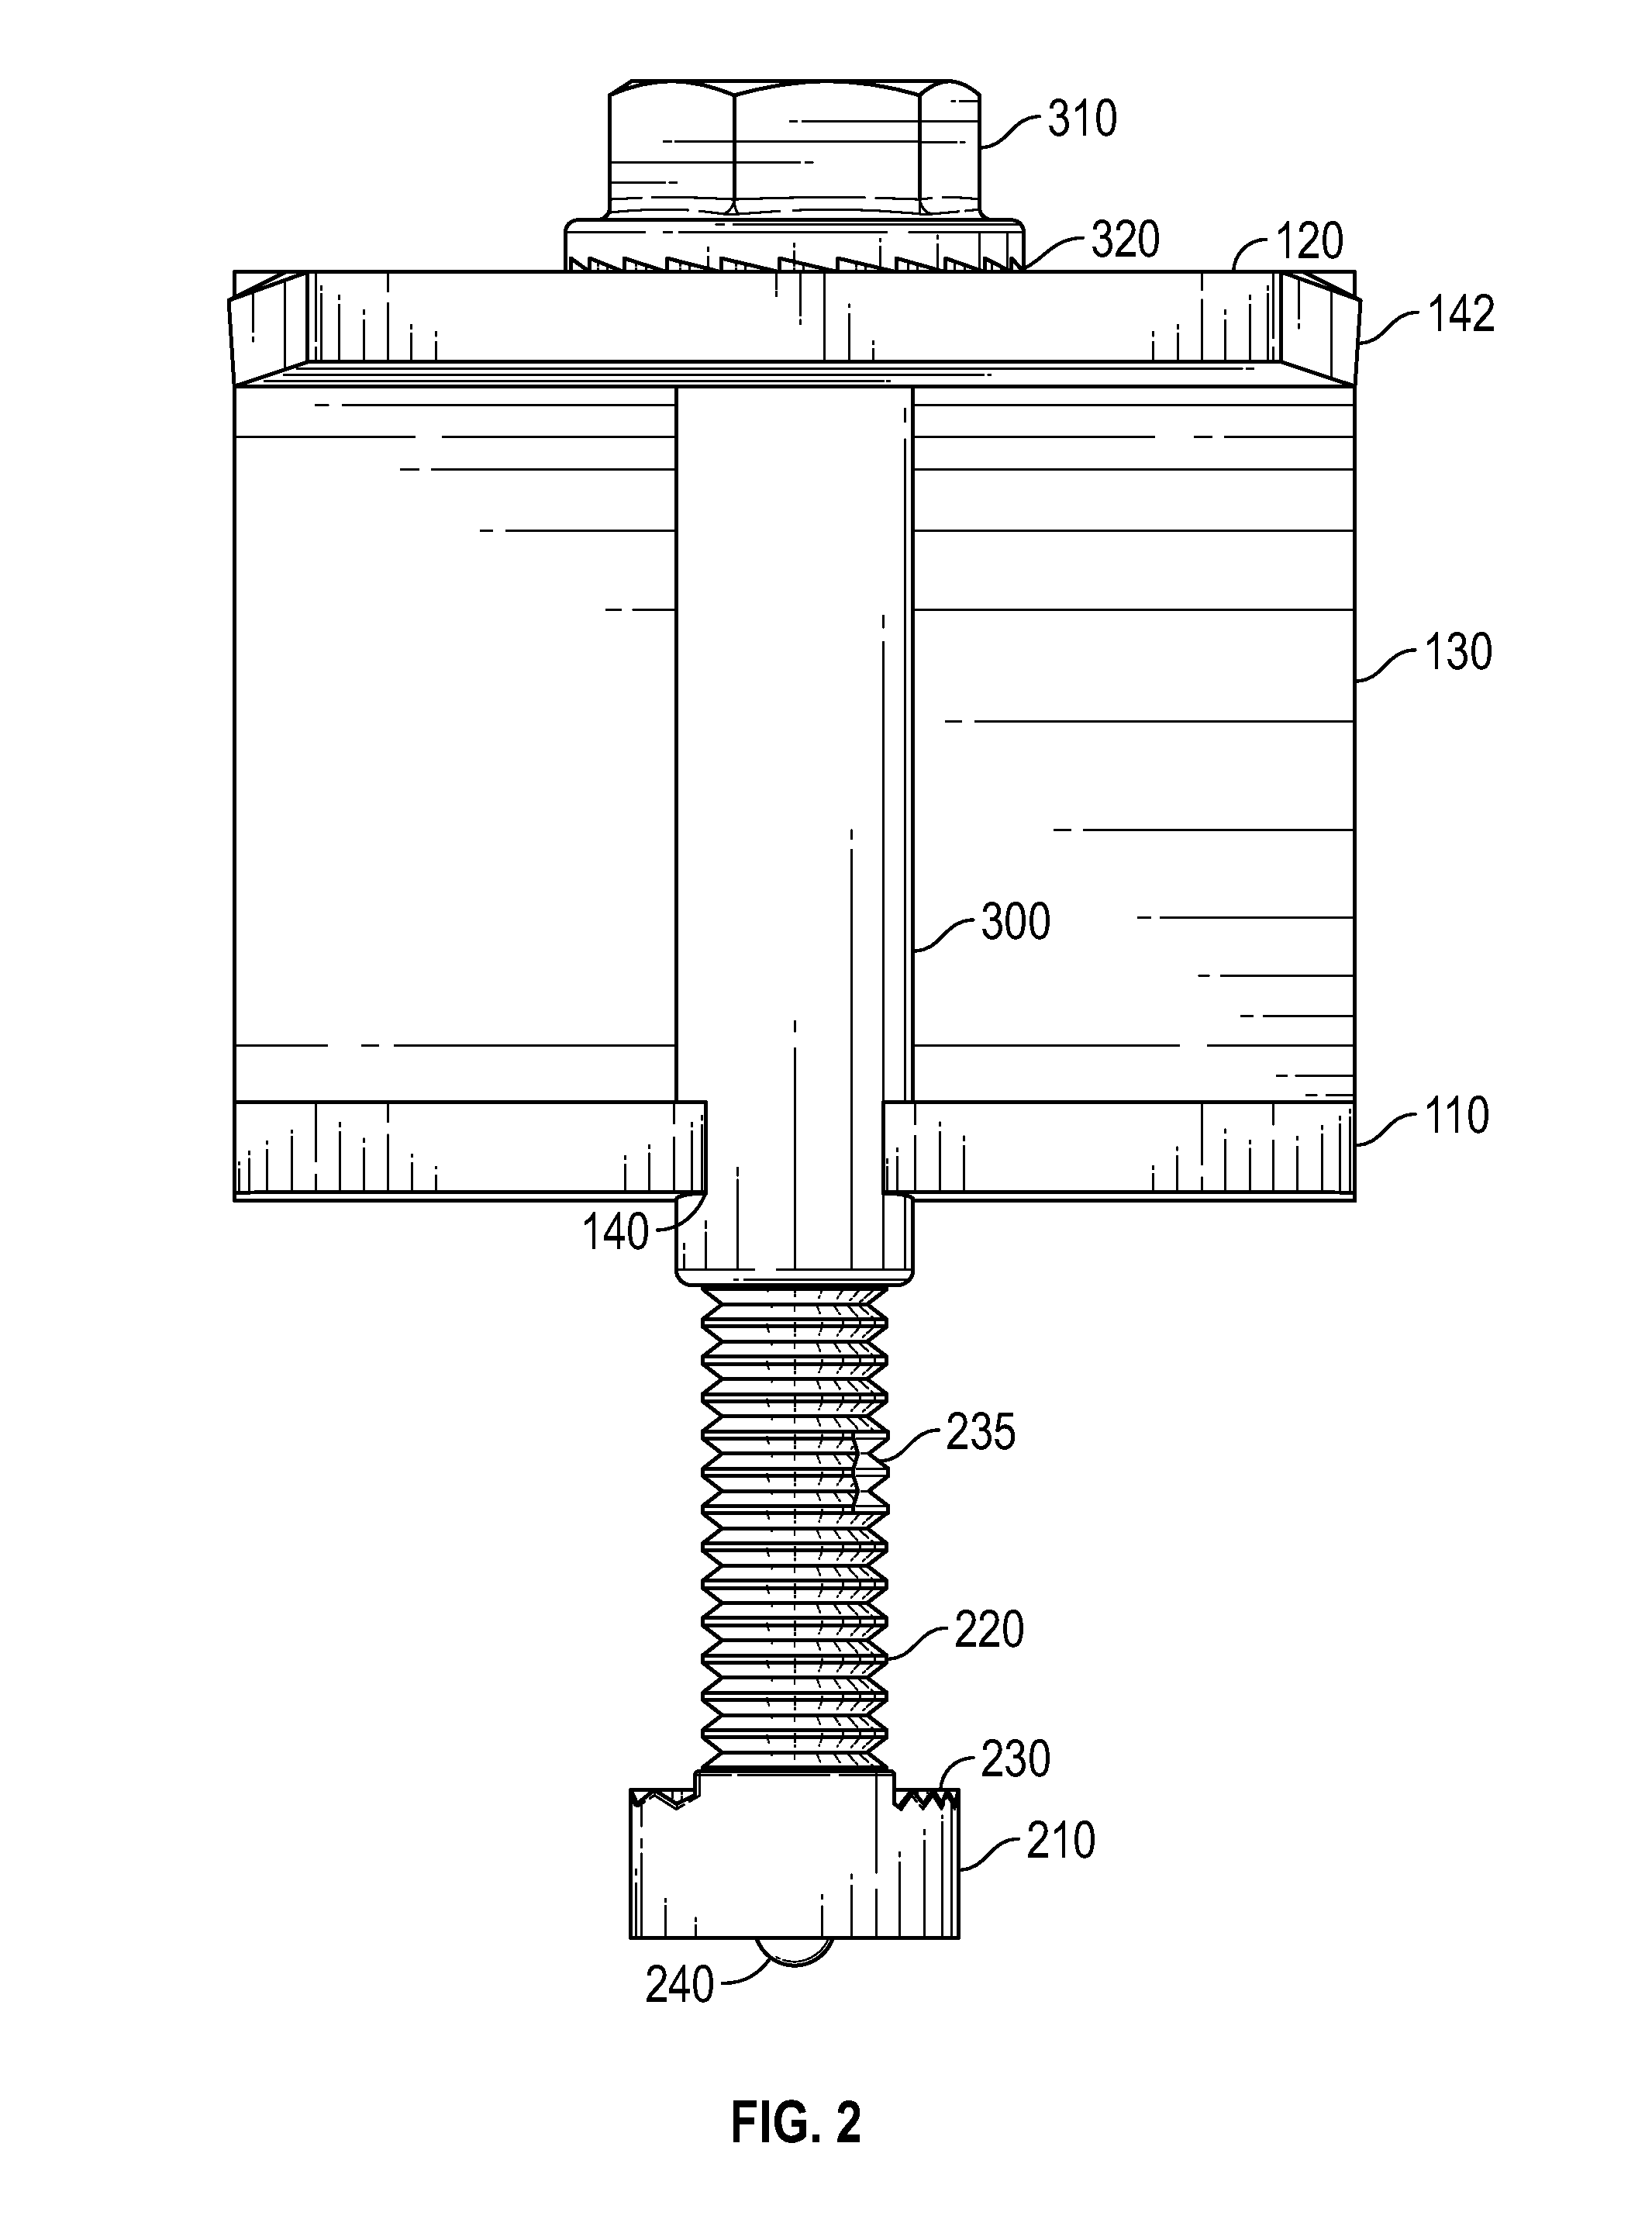 Clamp for securing and electrically bonding solar panels to a rail support